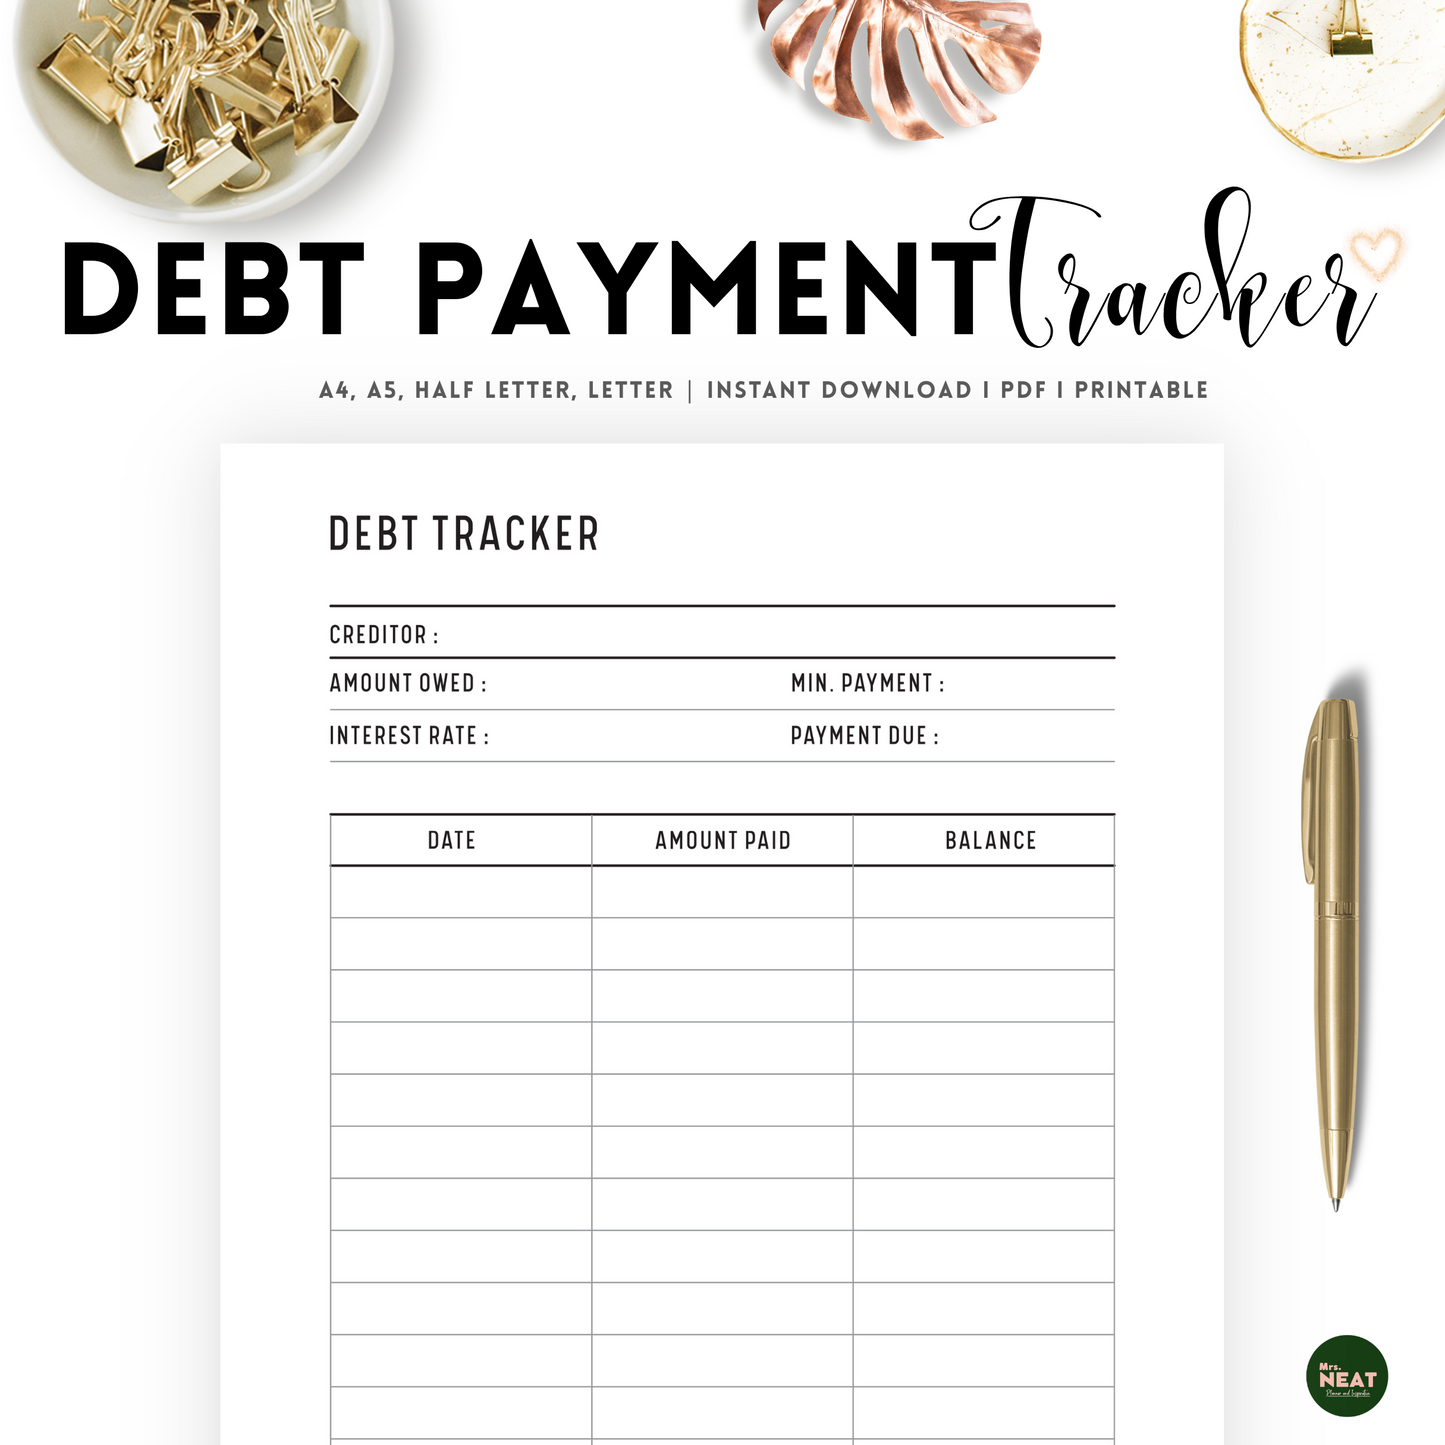 Debt Payment Tracker with room for creditor, Amount Owed, Interest Rate, Min Payment, and Payment due